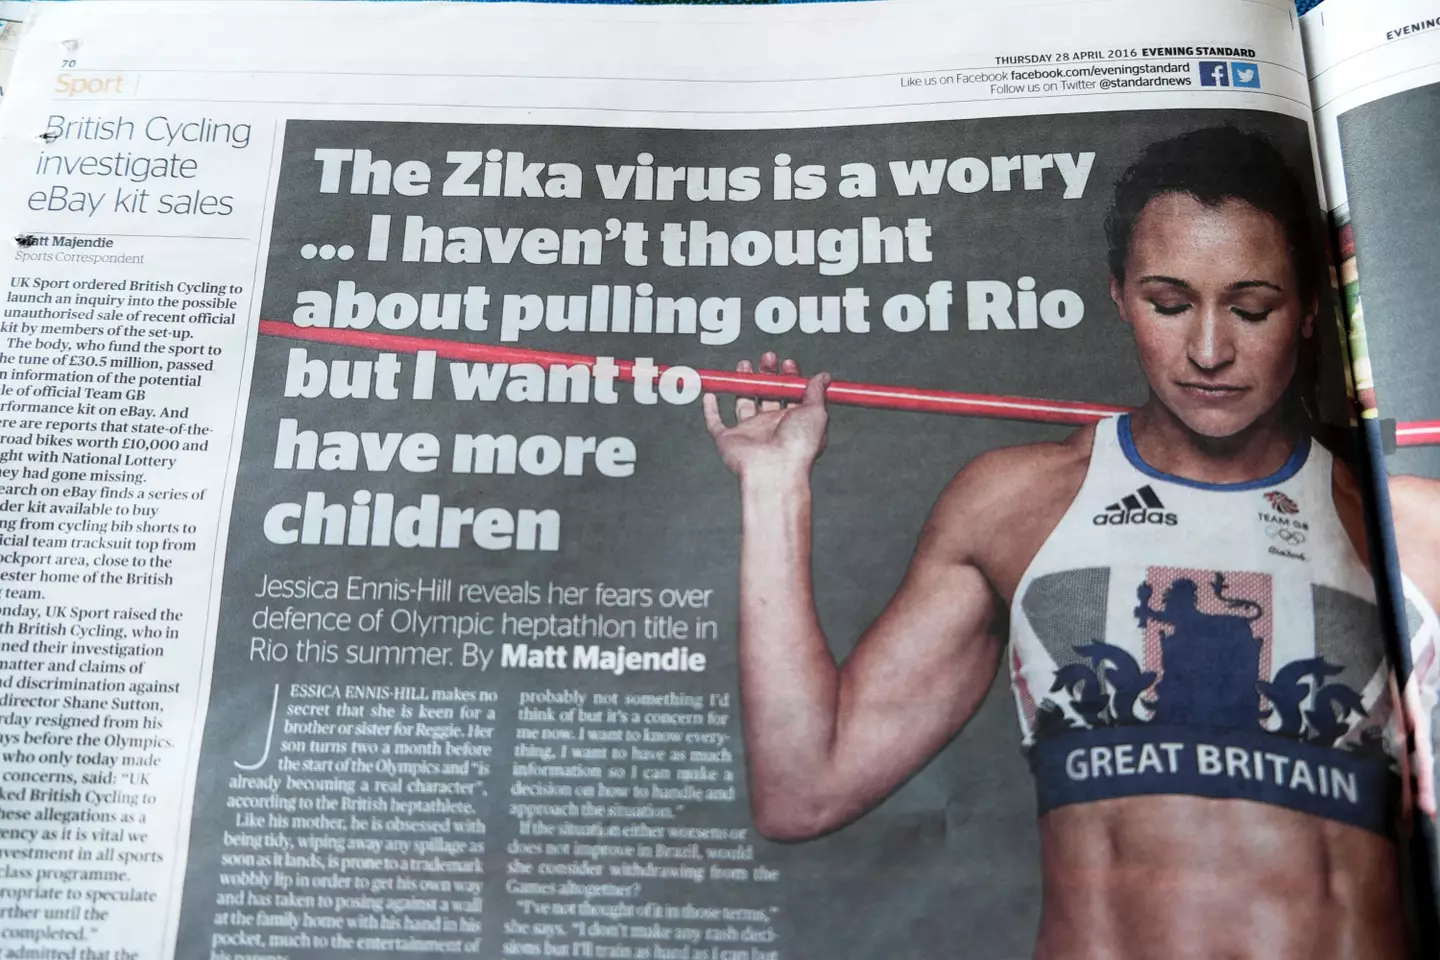 Article about Rio games and Zika Virus in the Evening Standard /